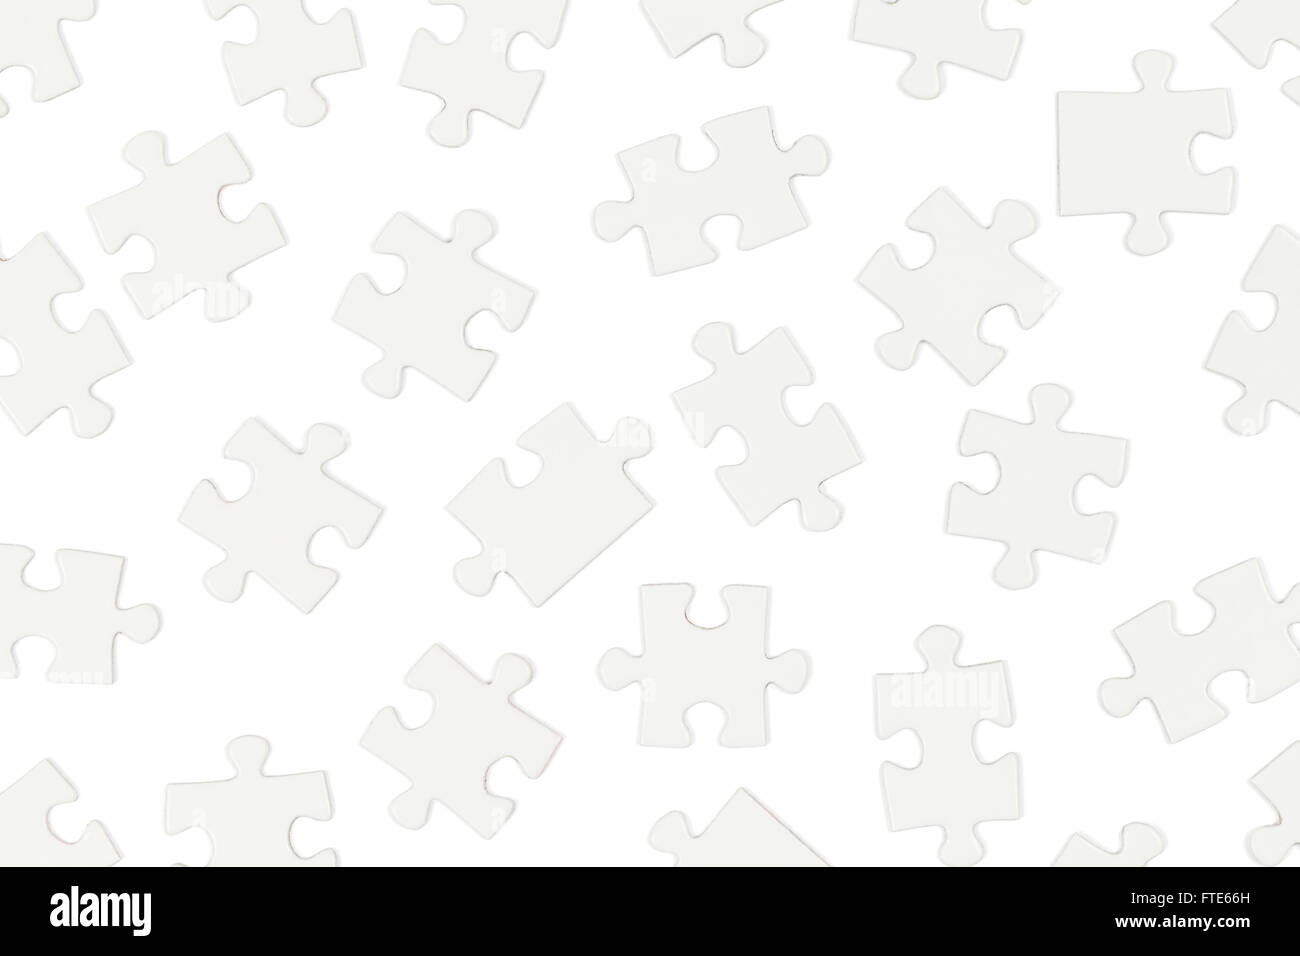 Scattered White Puzzle Pieces Isolated on White Background. Stock Photo